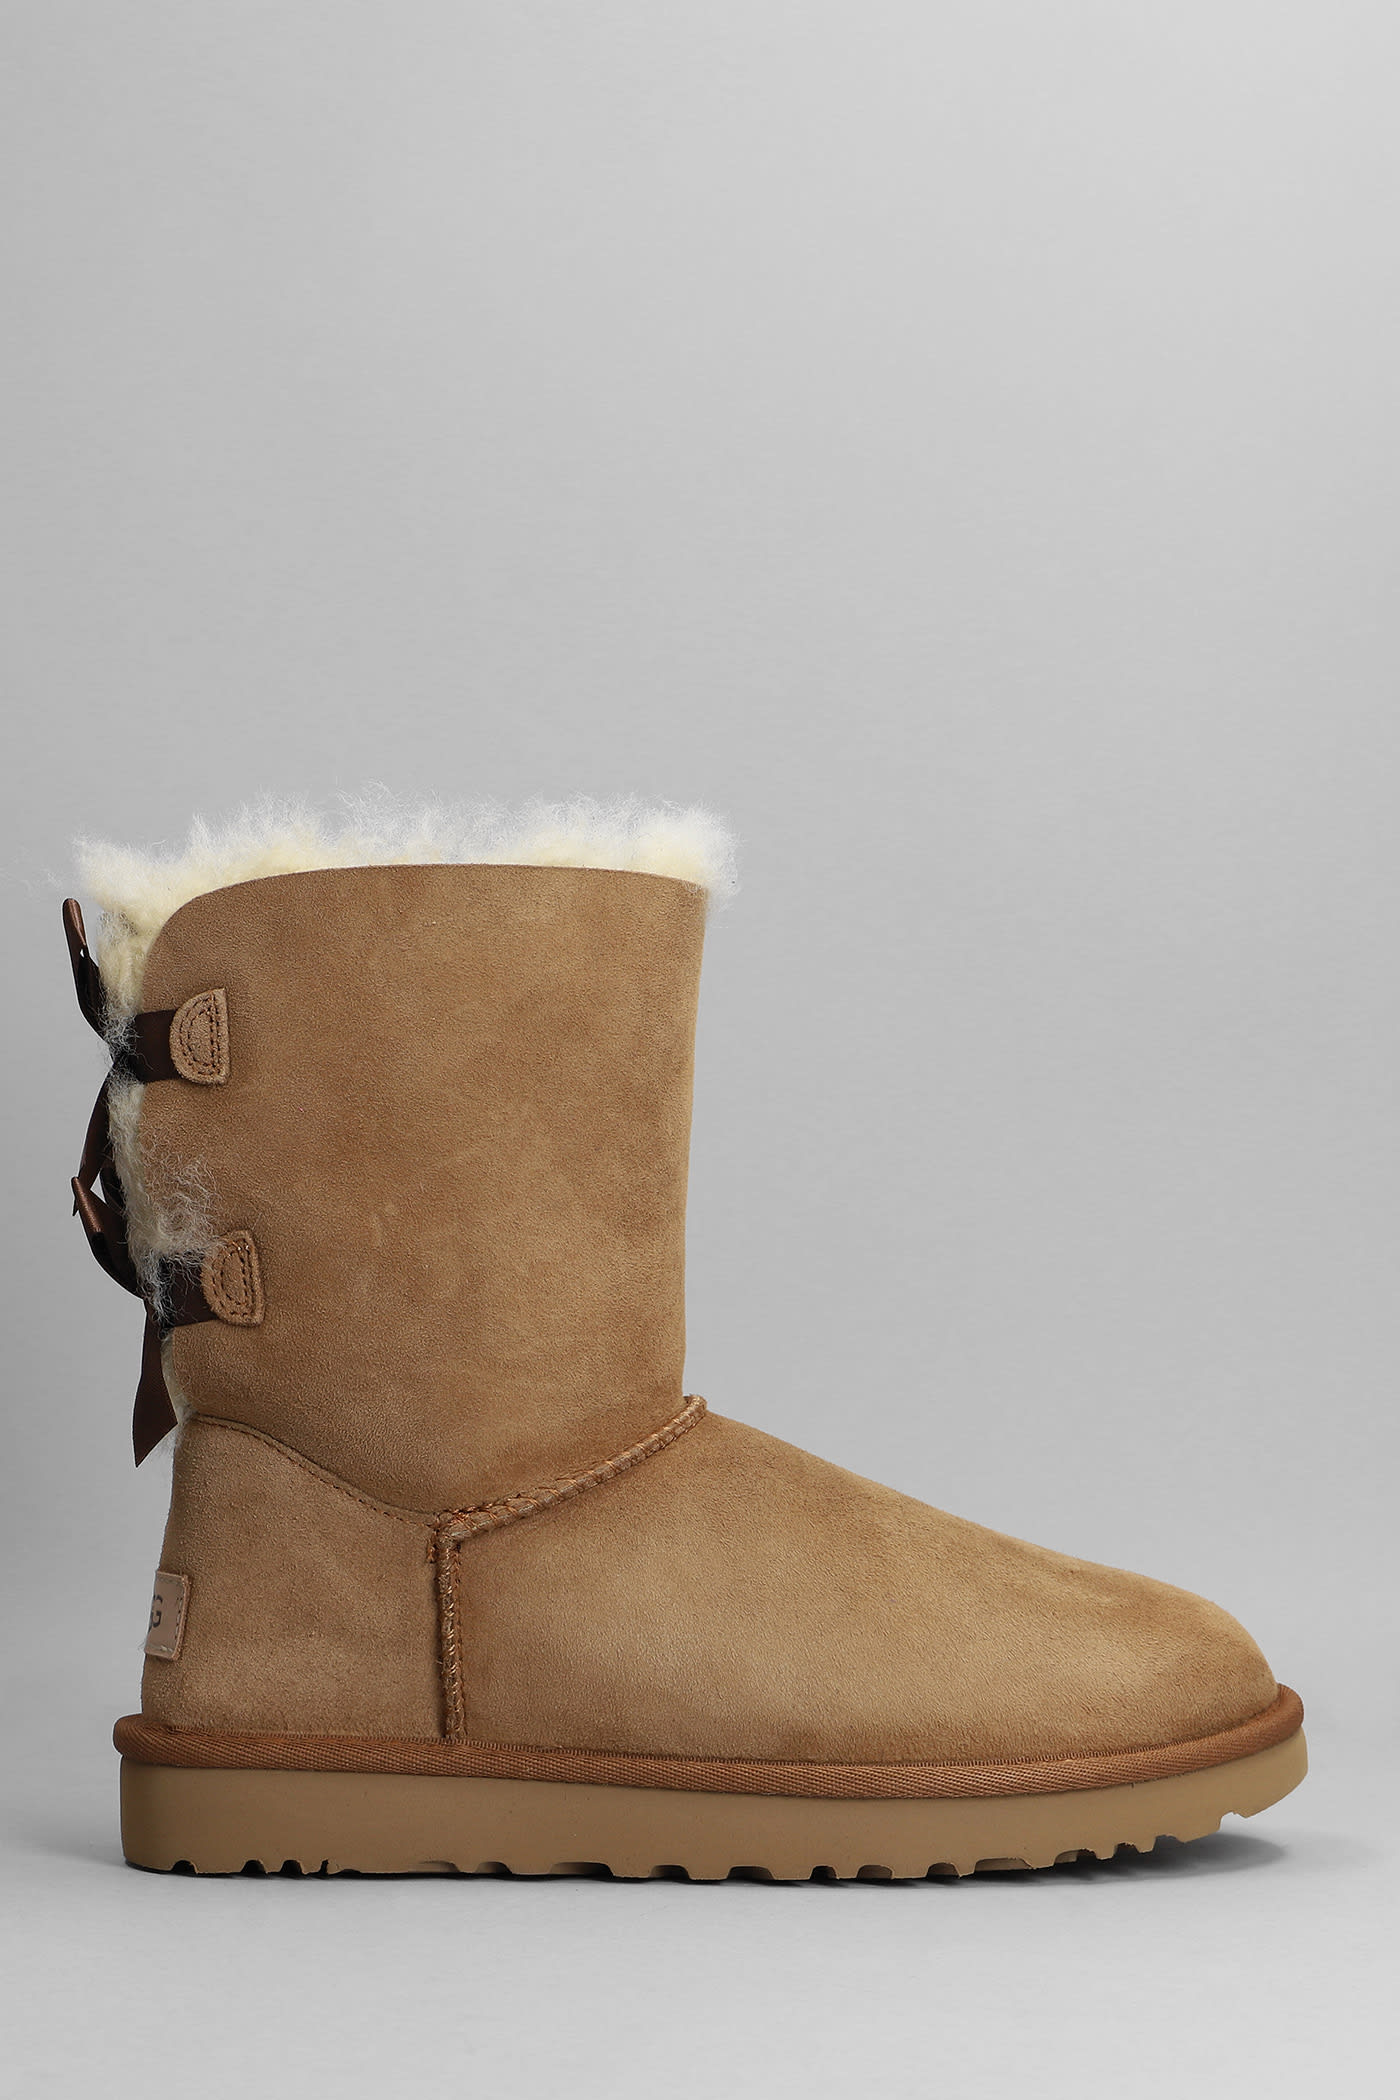 UGG BAILEY BOW II LOW HEELS ANKLE BOOTS IN LEATHER COLOR SUEDE